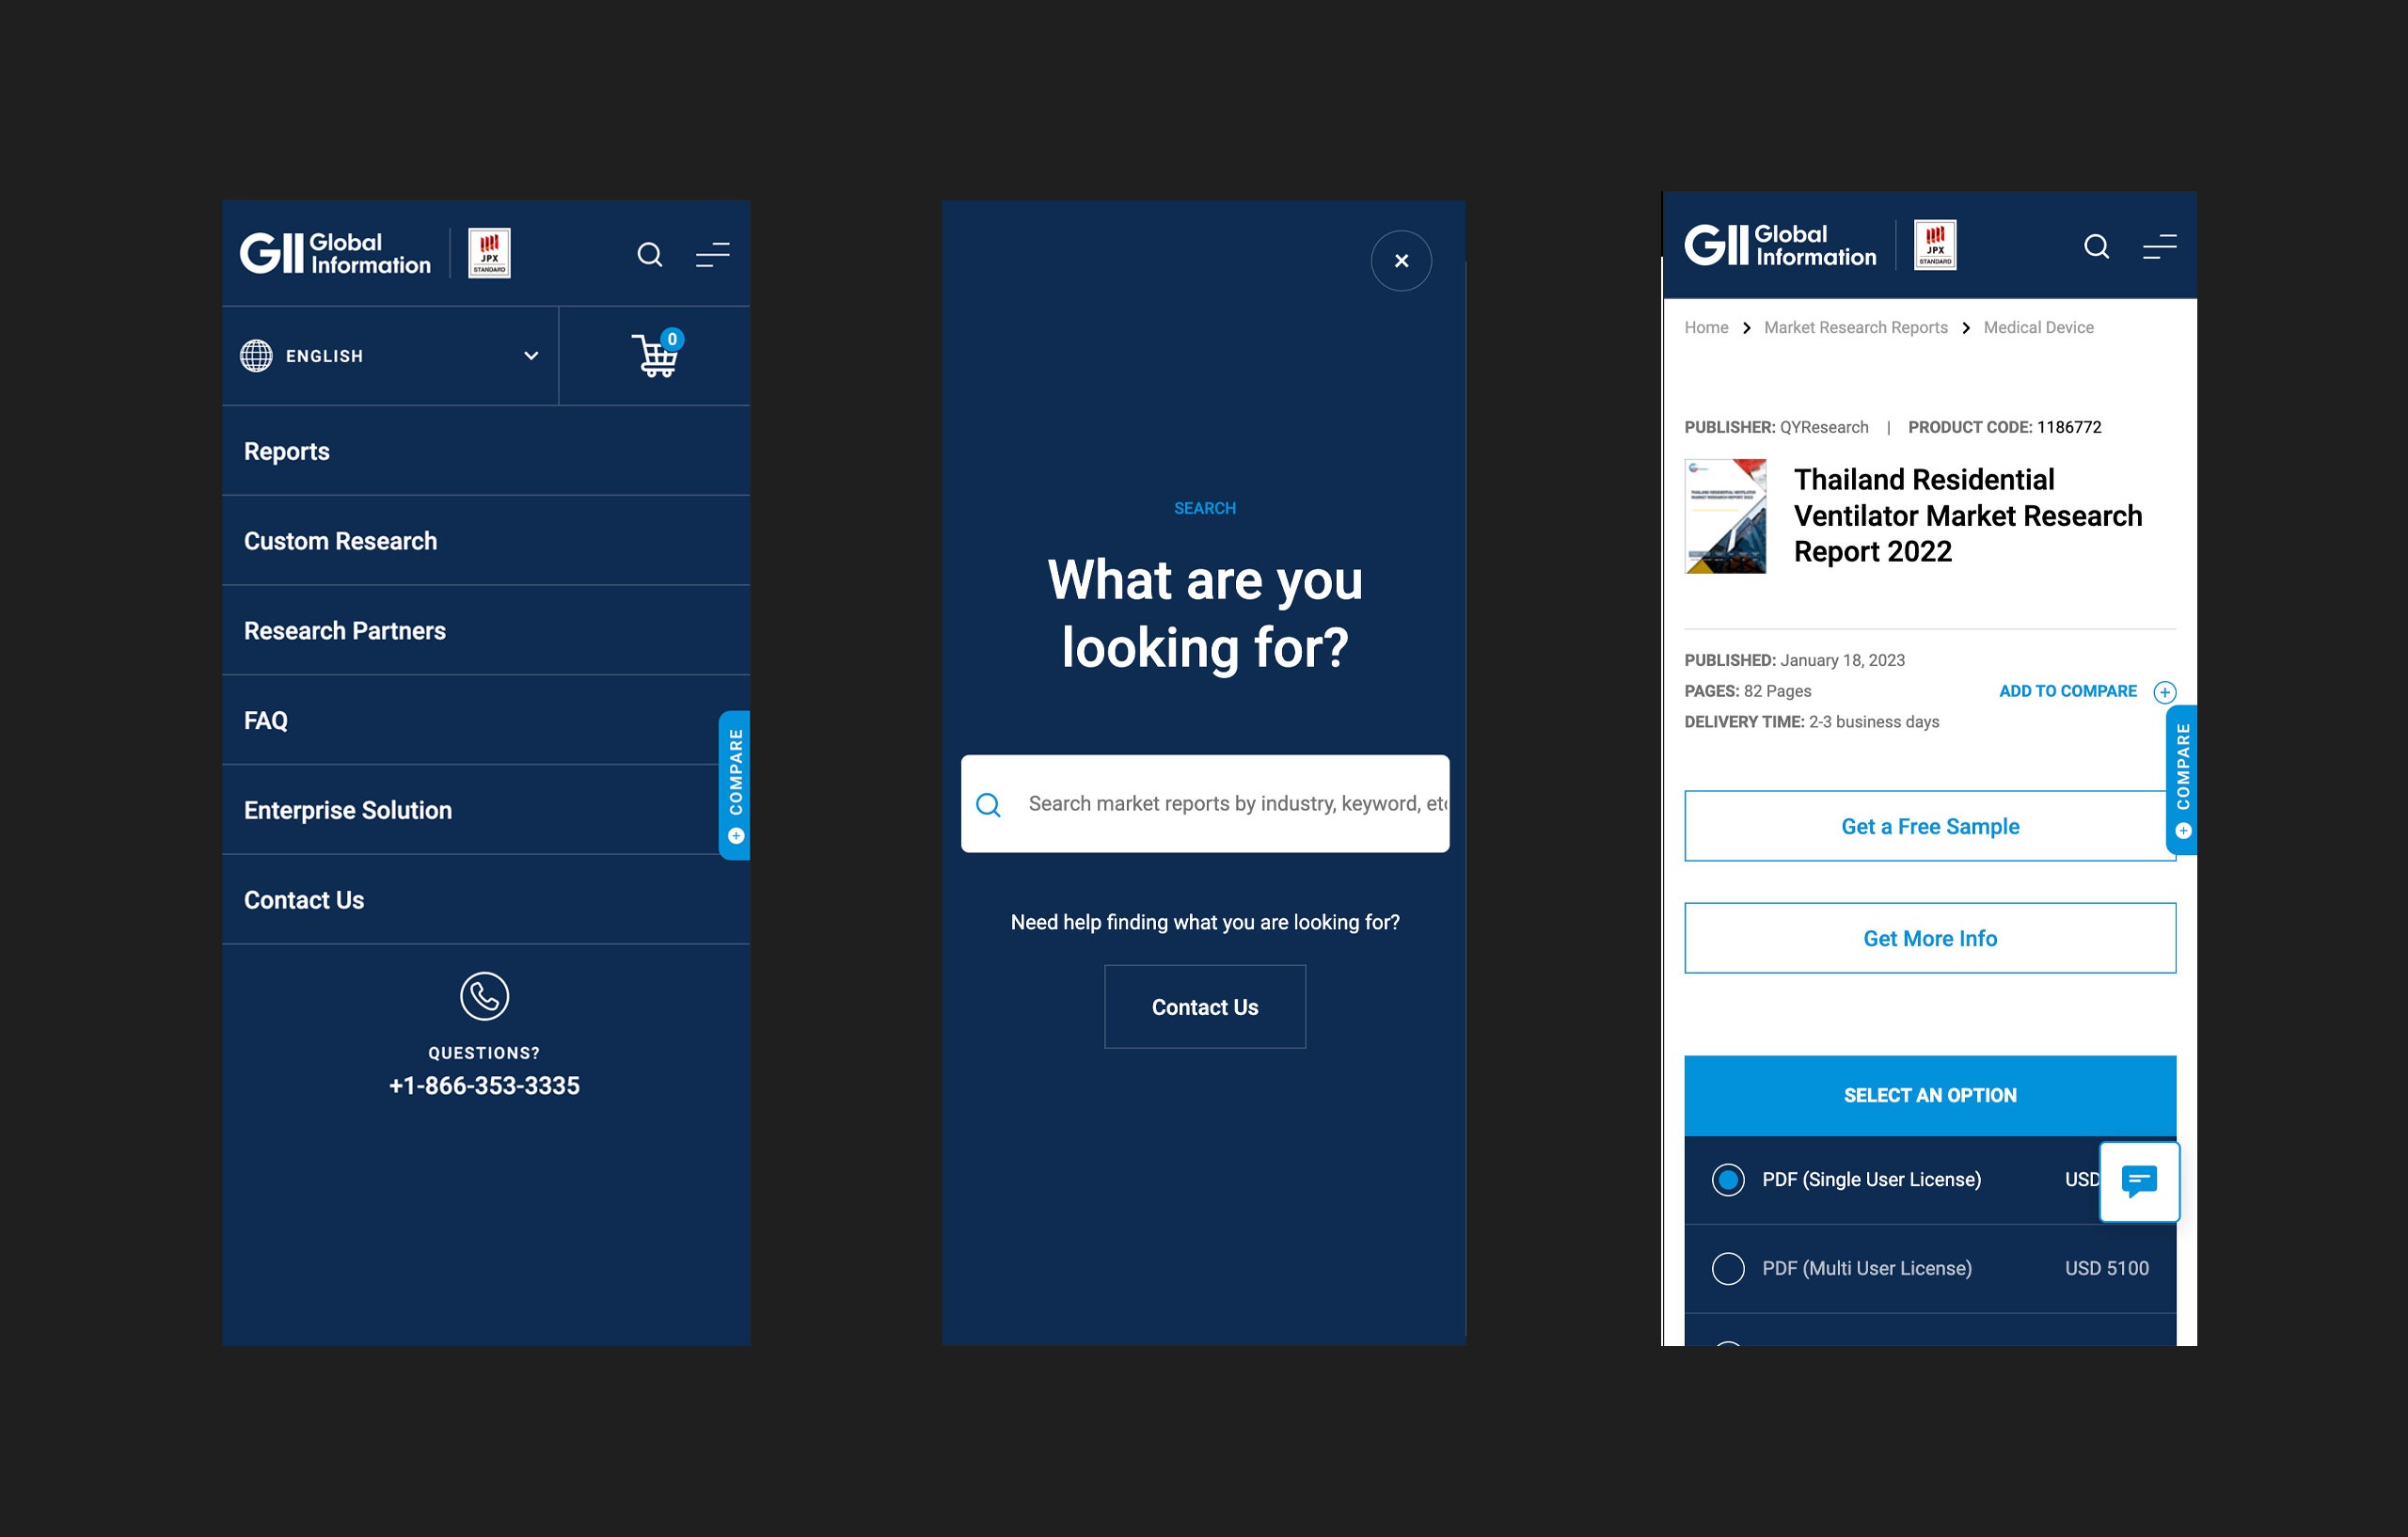 We worked with GII Research to update and modernize the navigation user interface